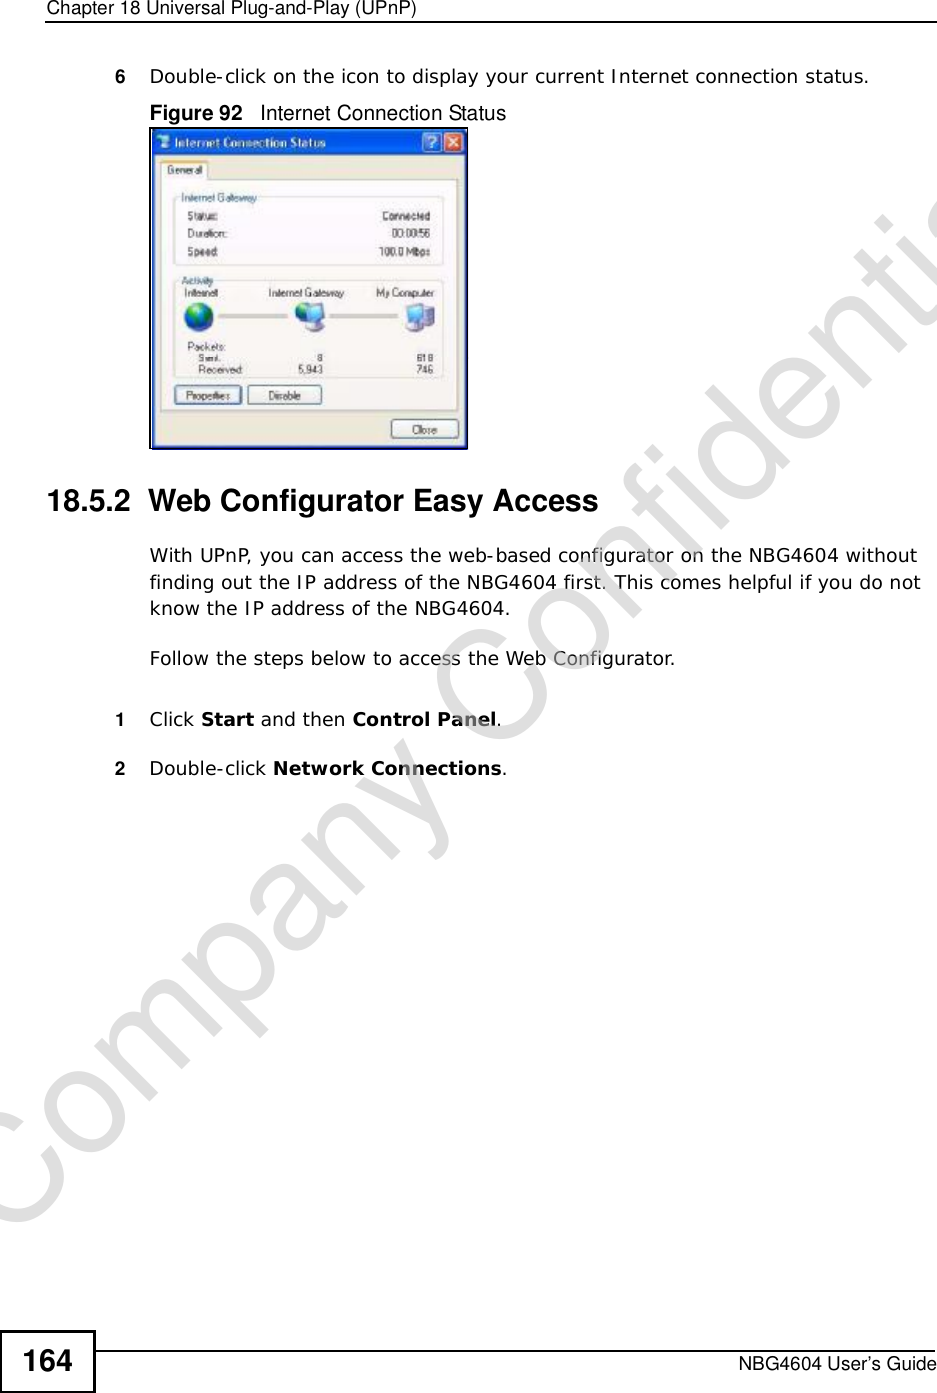 Chapter 18Universal Plug-and-Play (UPnP)NBG4604 User’s Guide1646Double-click on the icon to display your current Internet connection status.Figure 92   Internet Connection Status18.5.2  Web Configurator Easy AccessWith UPnP, you can access the web-based configurator on the NBG4604 without finding out the IP address of the NBG4604 first. This comes helpful if you do not know the IP address of the NBG4604.Follow the steps below to access the Web Configurator.1Click Start and then Control Panel.2Double-click Network Connections.Company Confidential